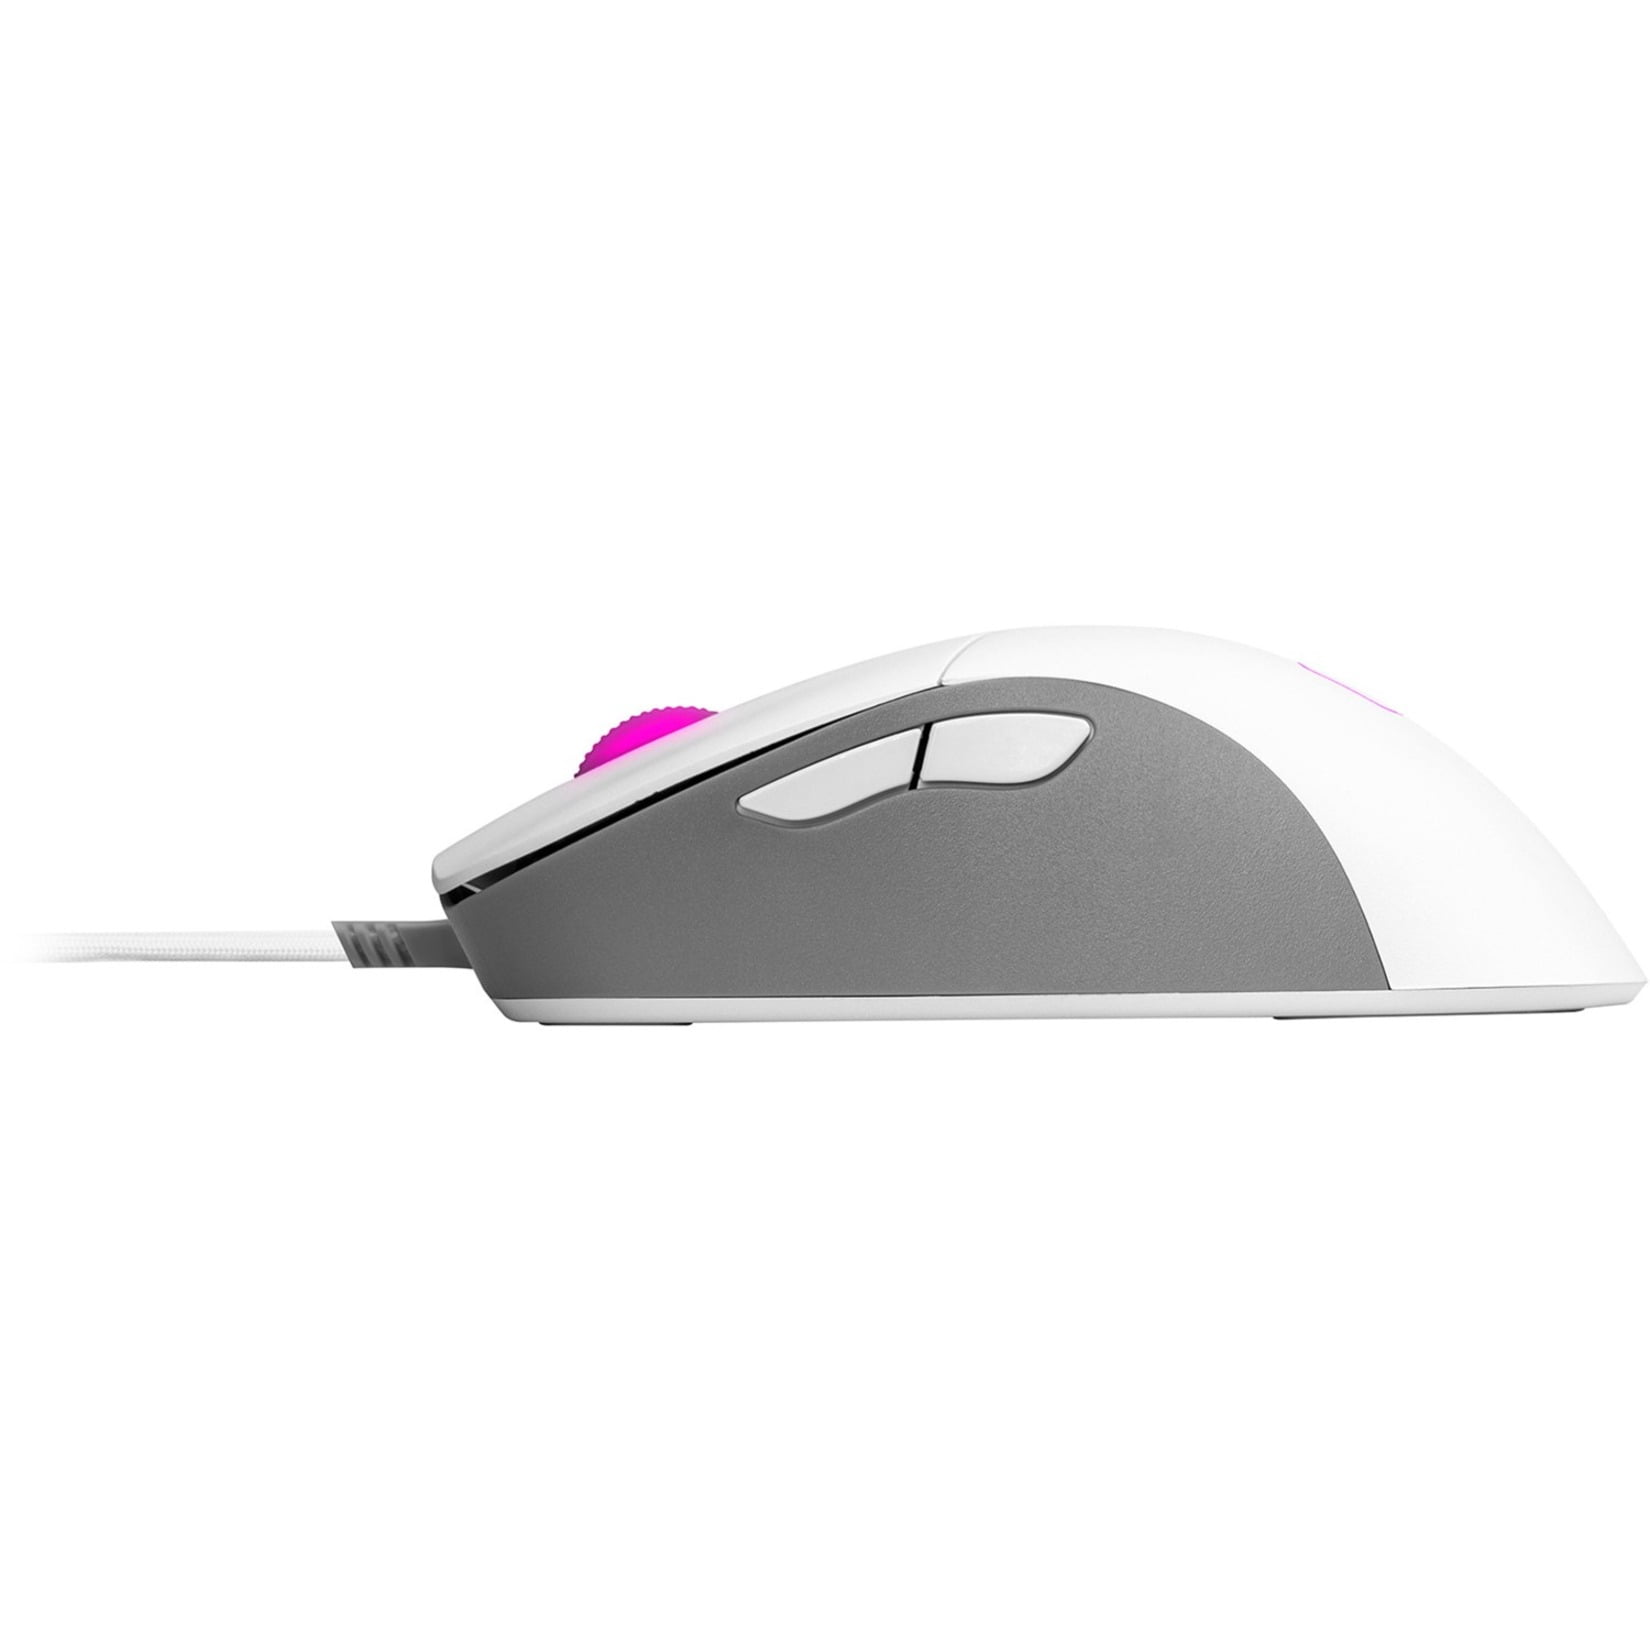 Cooler Master MasterMouse MM730 RGB Gaming Mouse - White